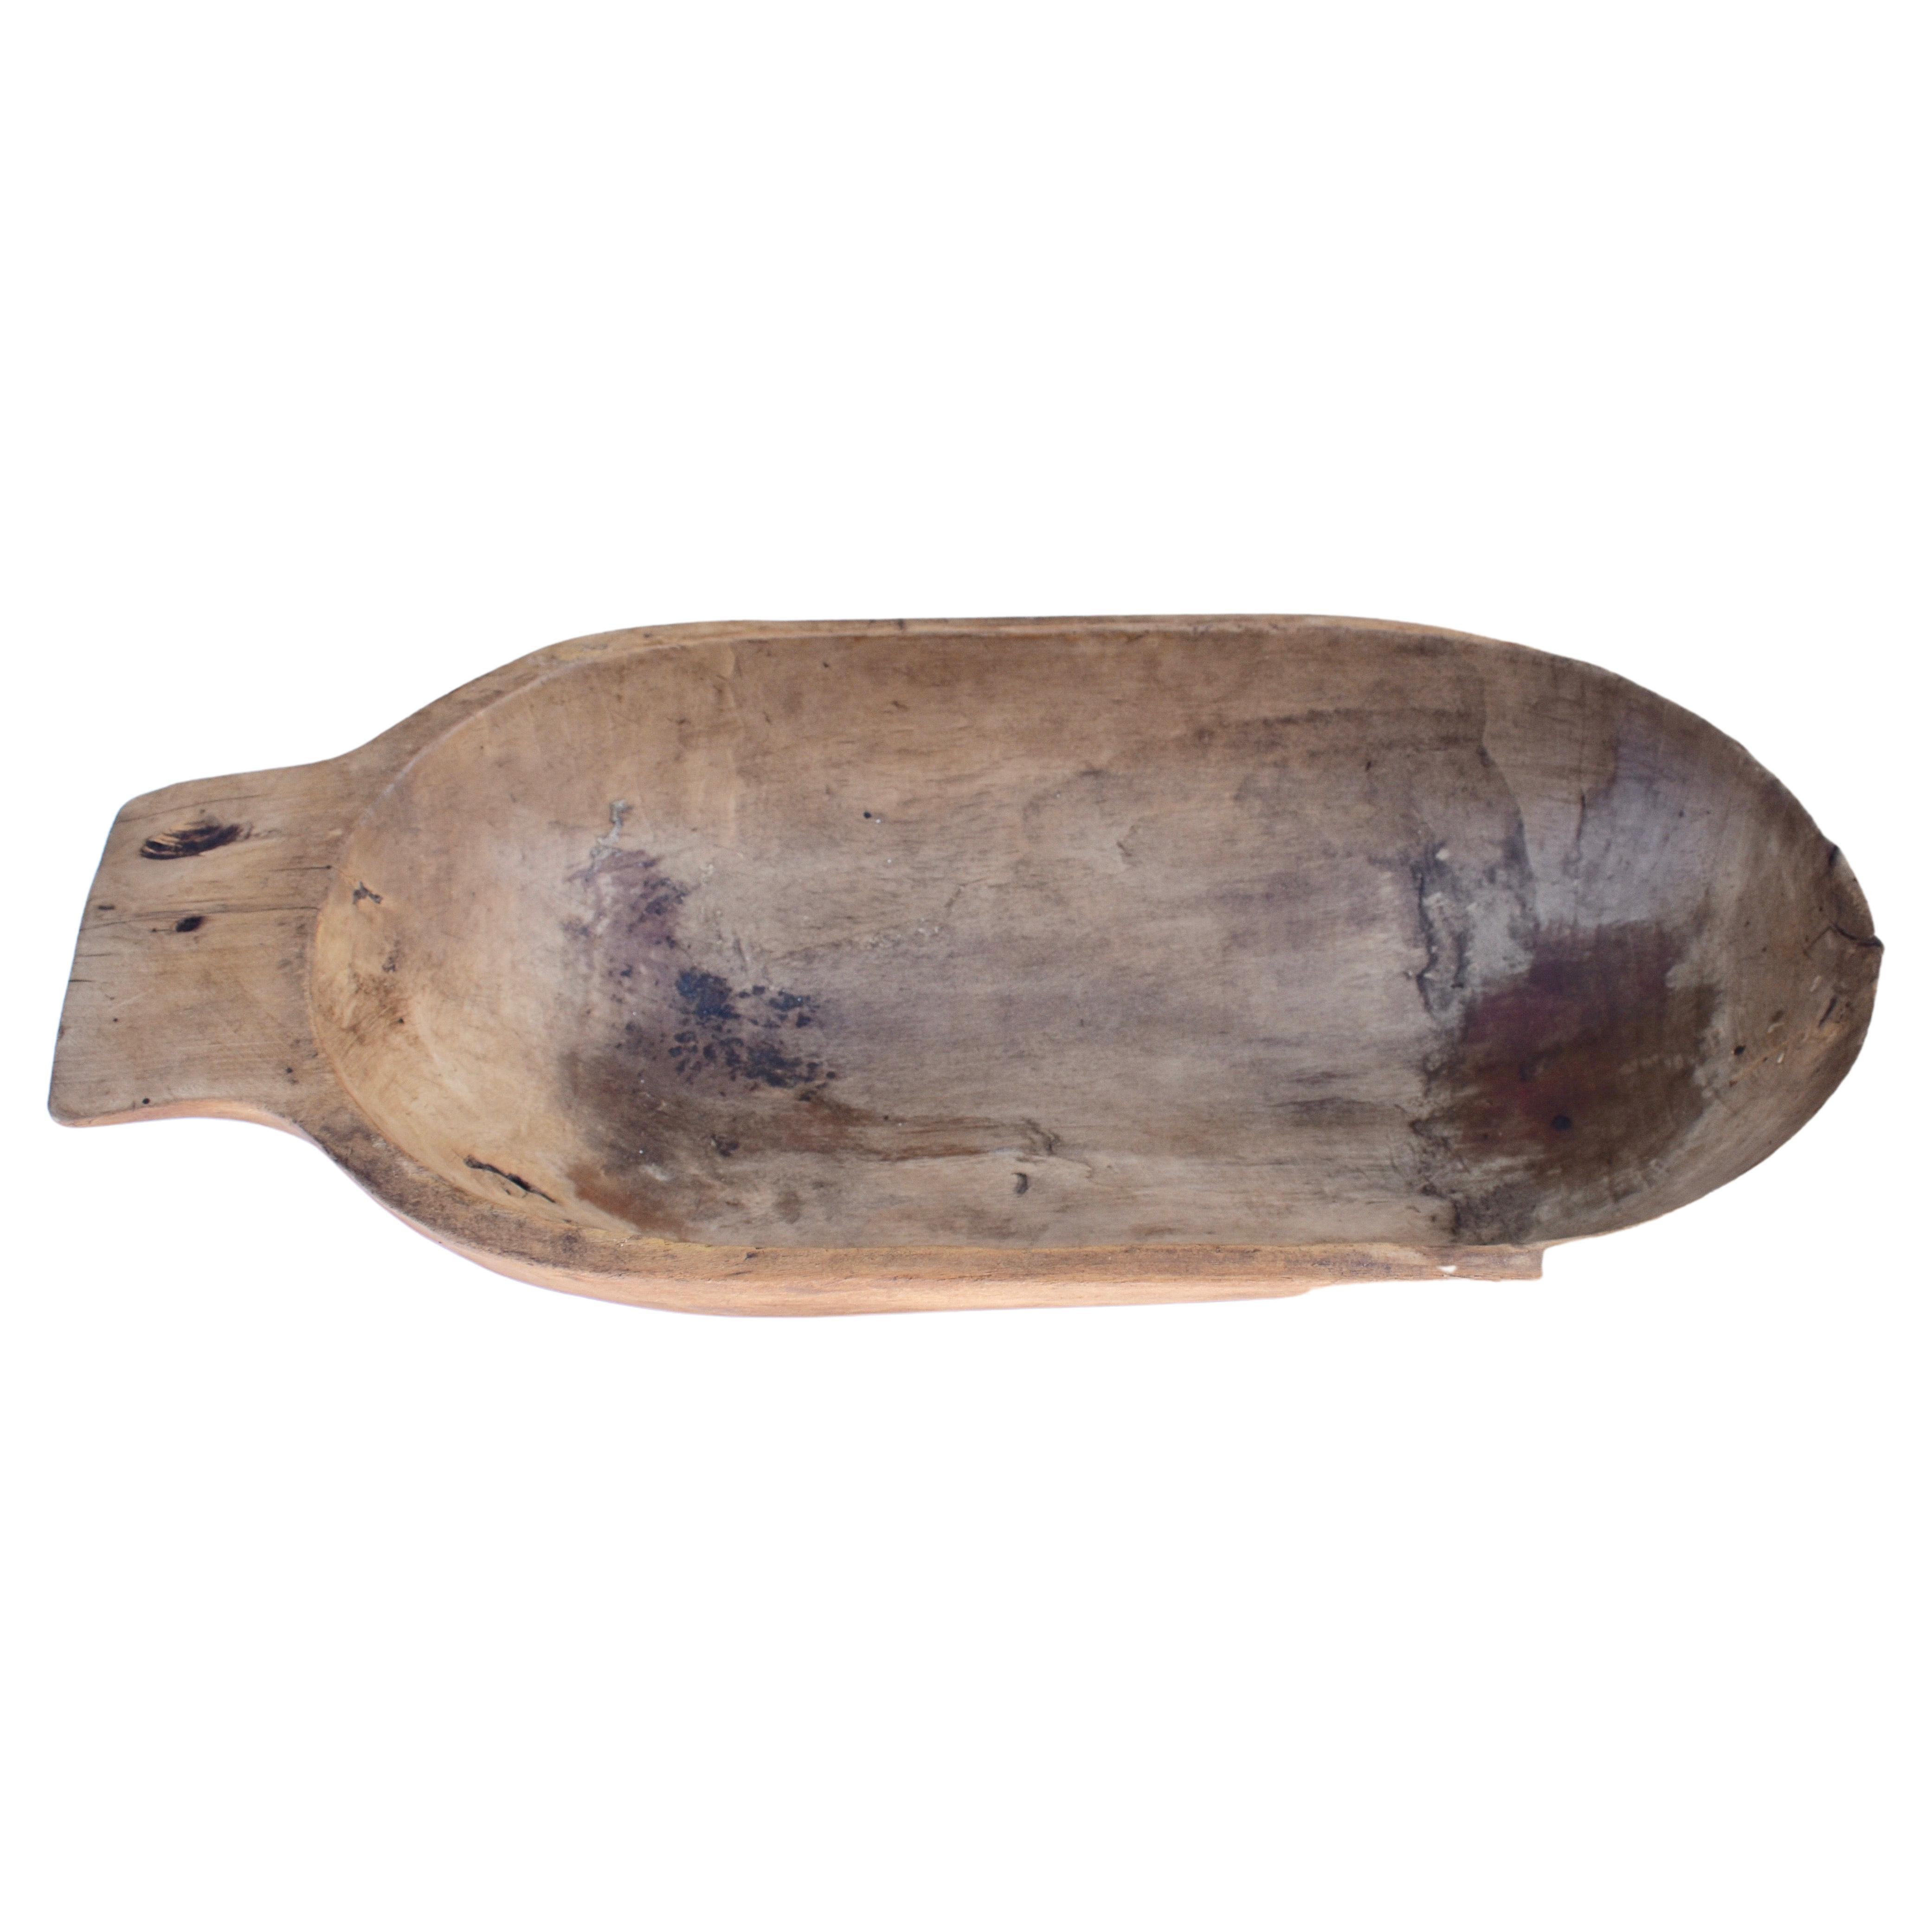 Hand-Hewn Fruitwood Trog or Dough Bowl For Sale